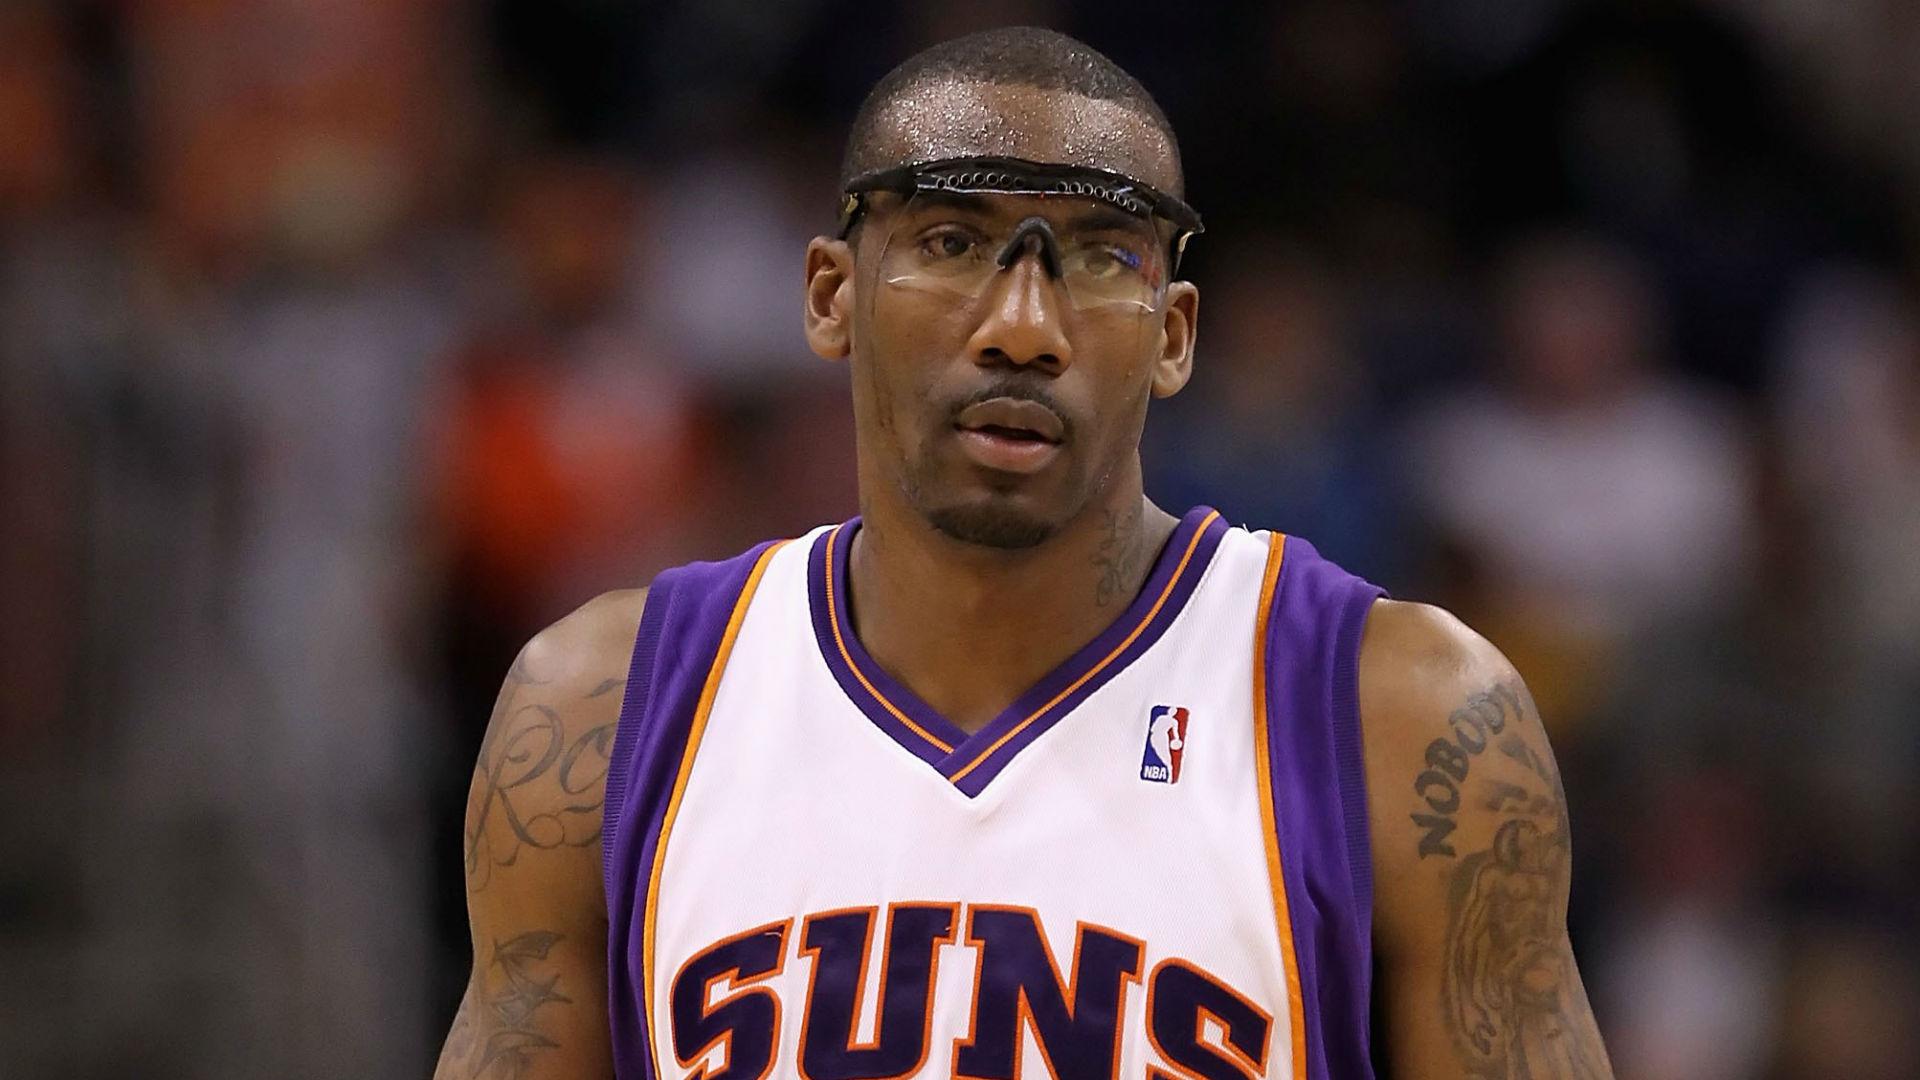 Amar'e Stoudemire on joining NBA team: I can help a team in any way